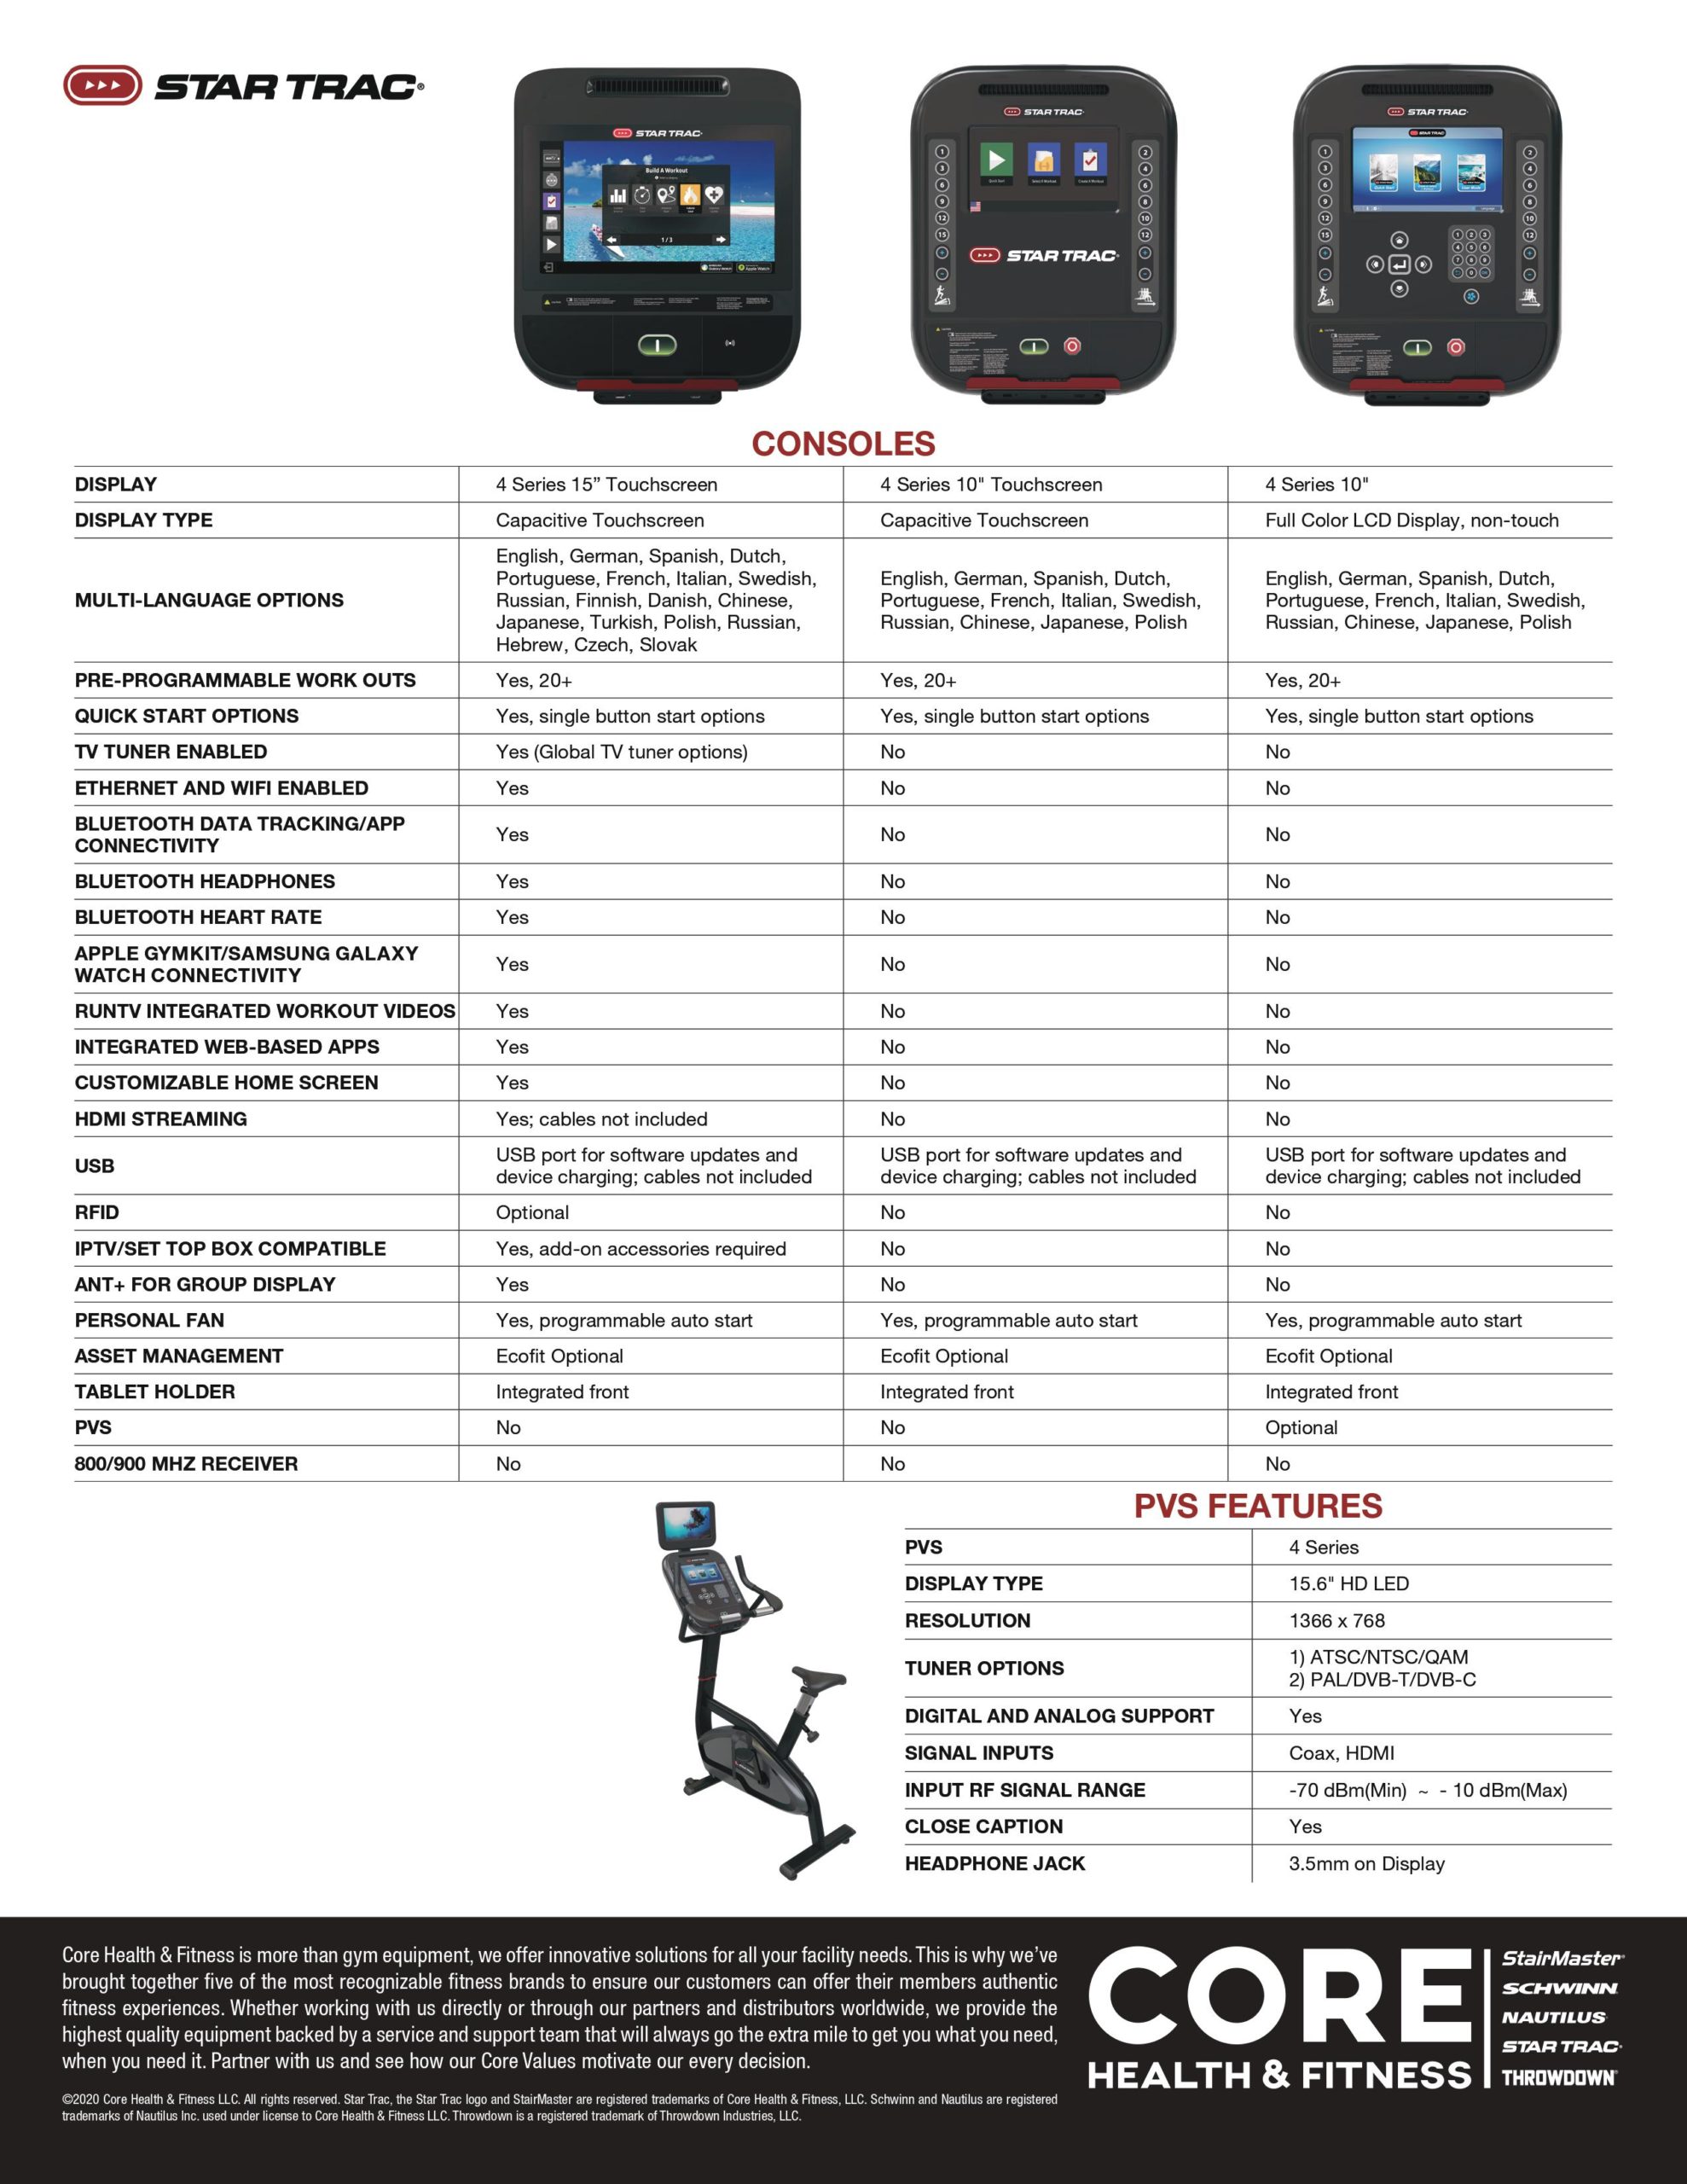 Star Trac Cross Trainer console options